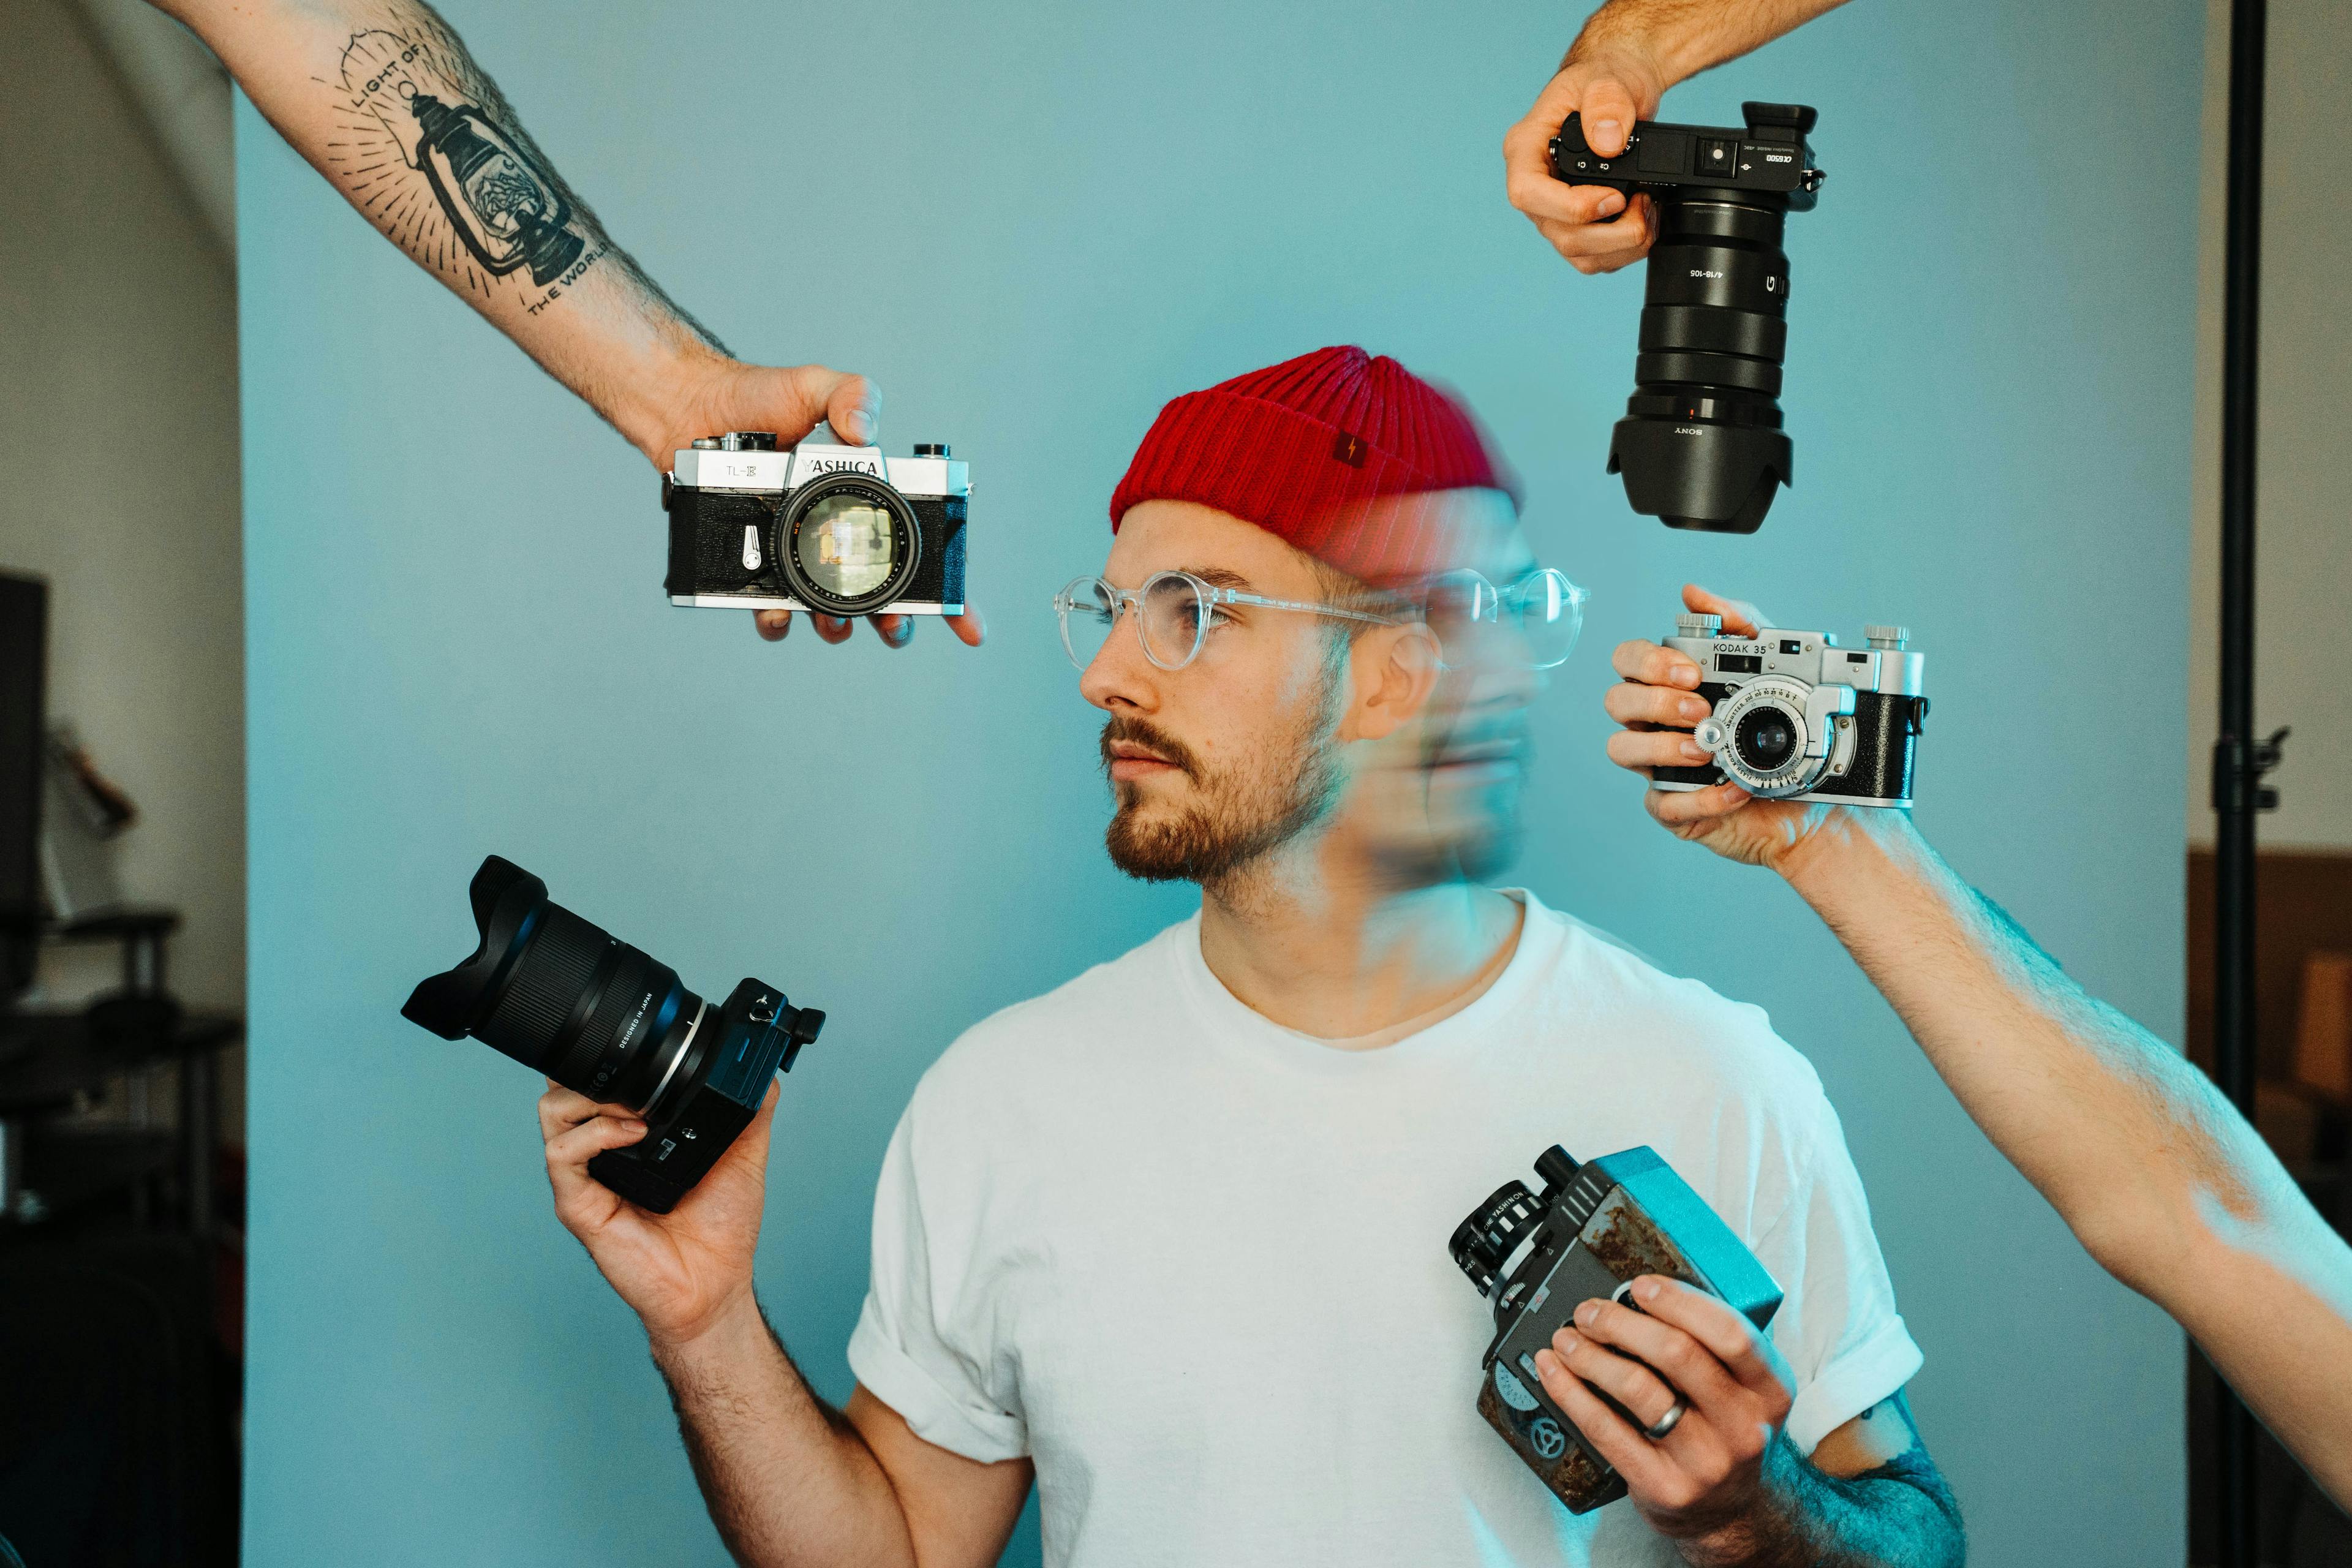 How to make more money as a photographer